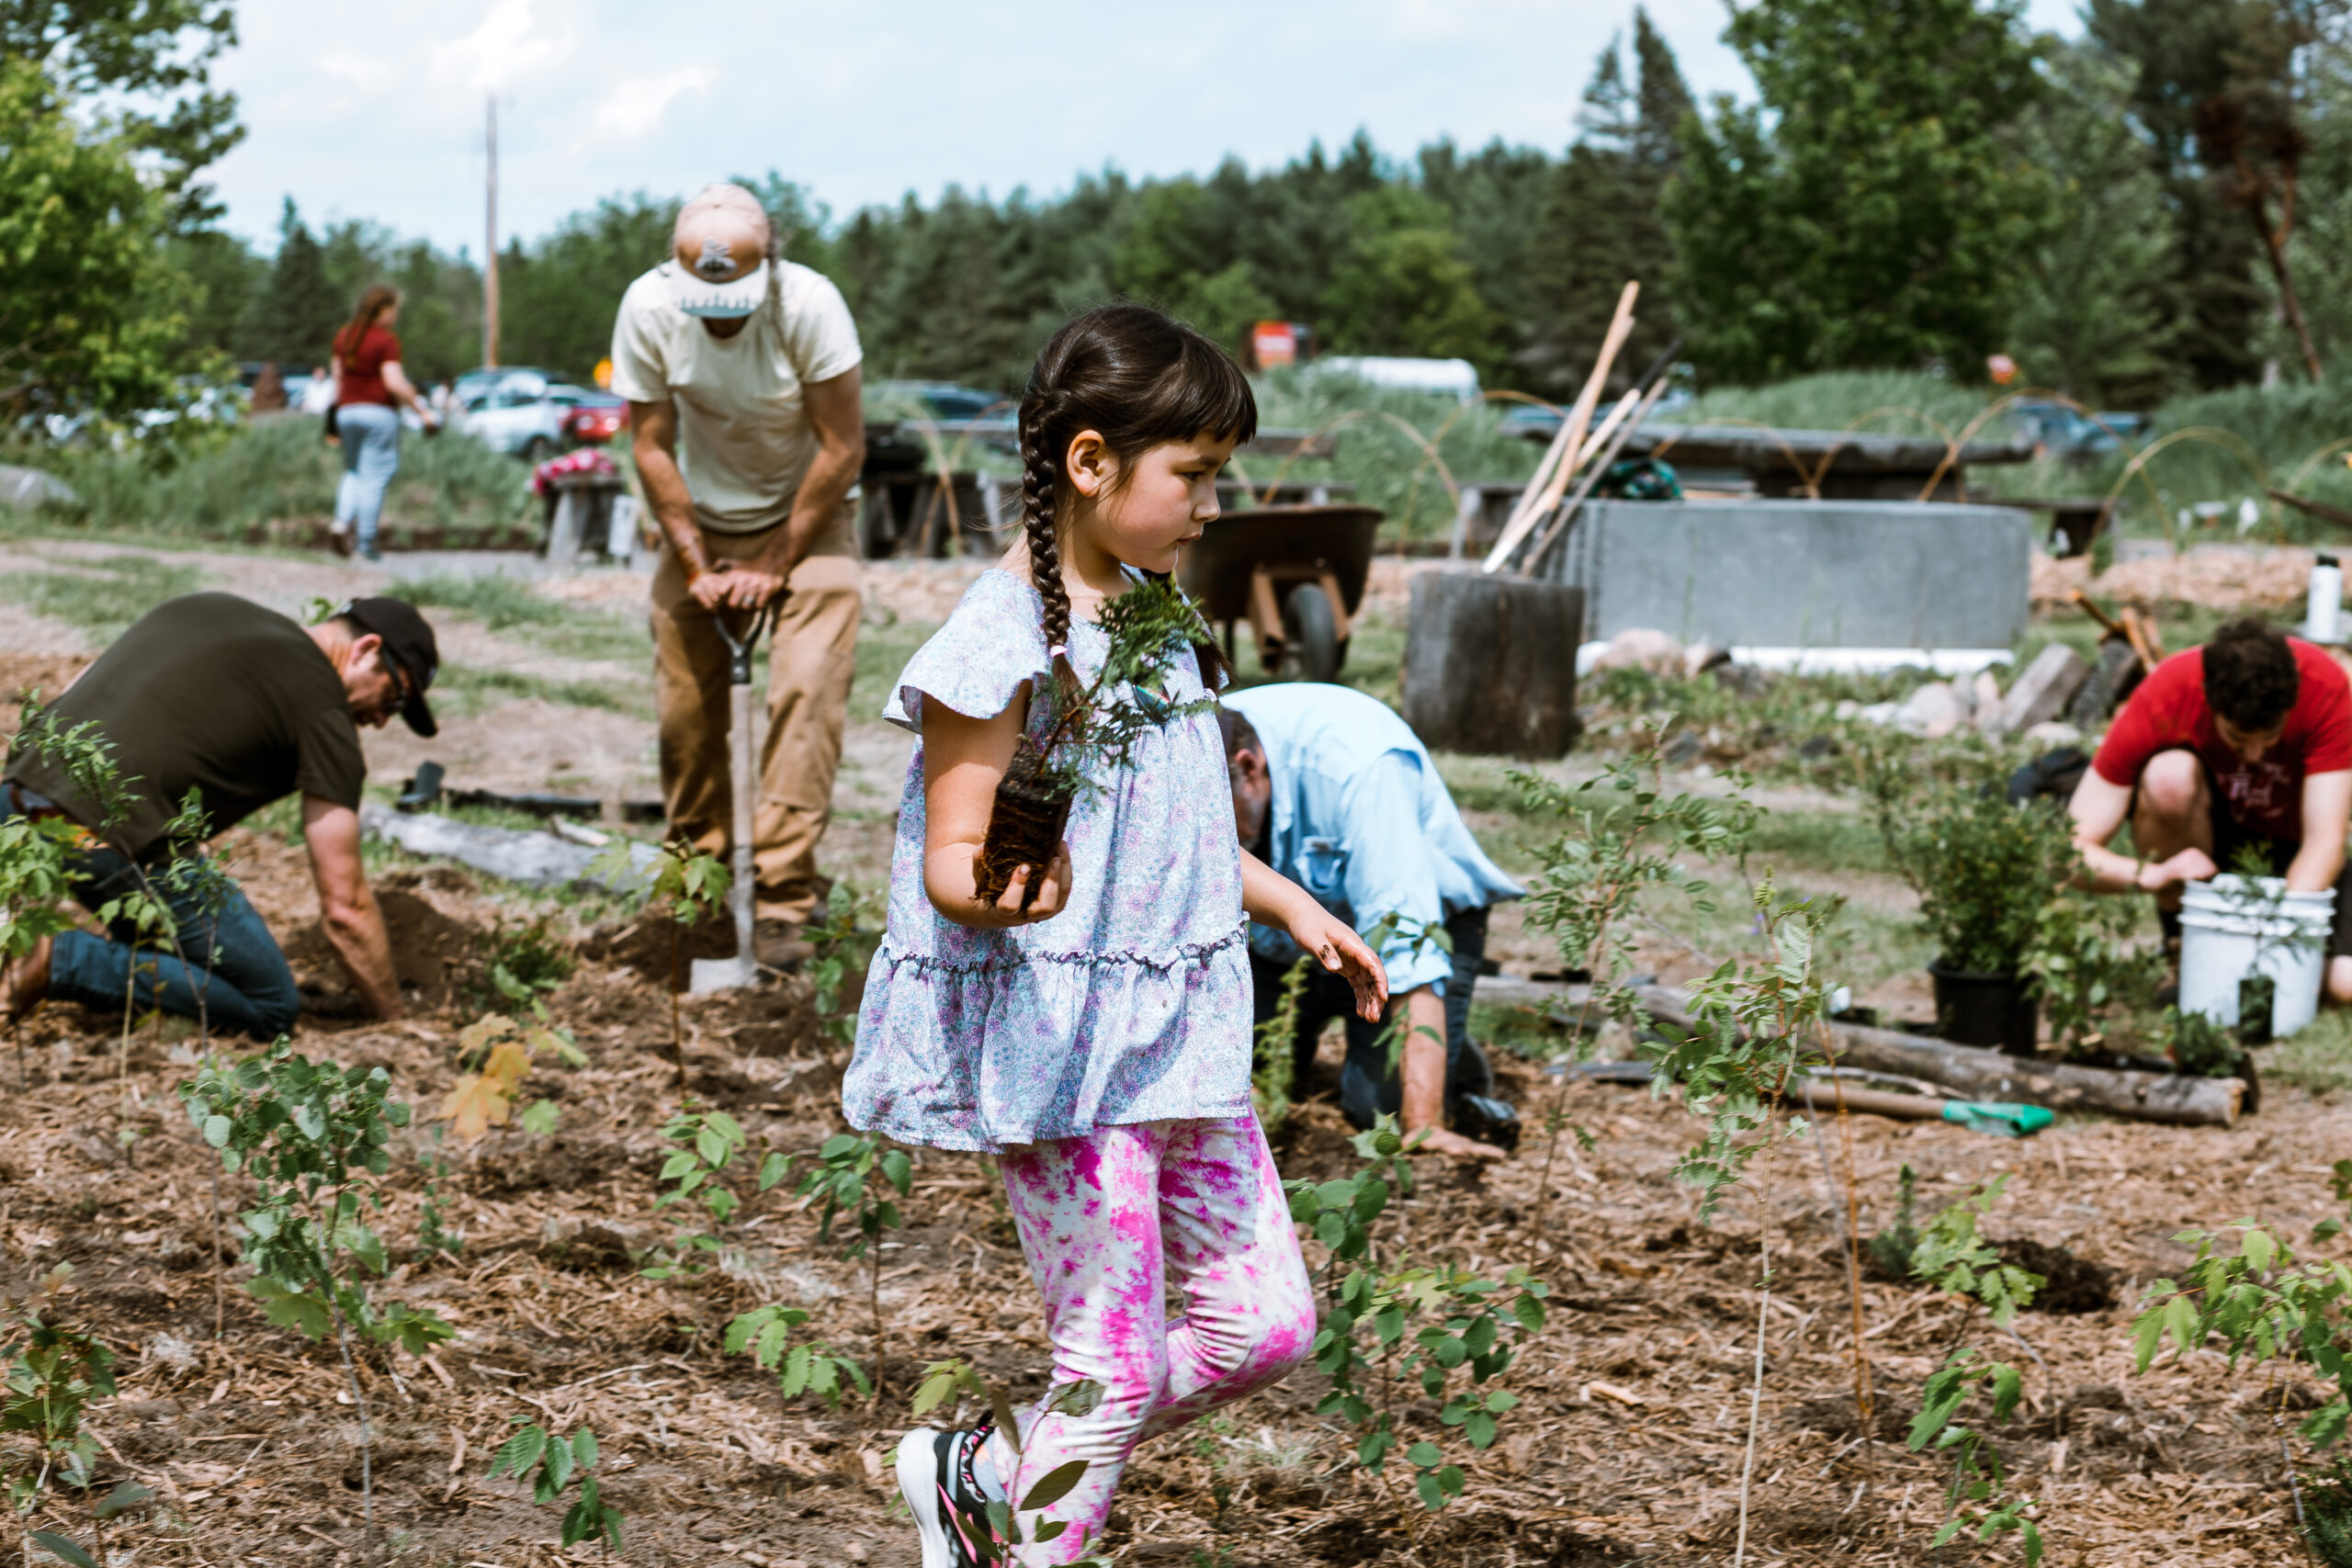 A child holding a seedling walking in front of several adults tending to an outdoor garden space.